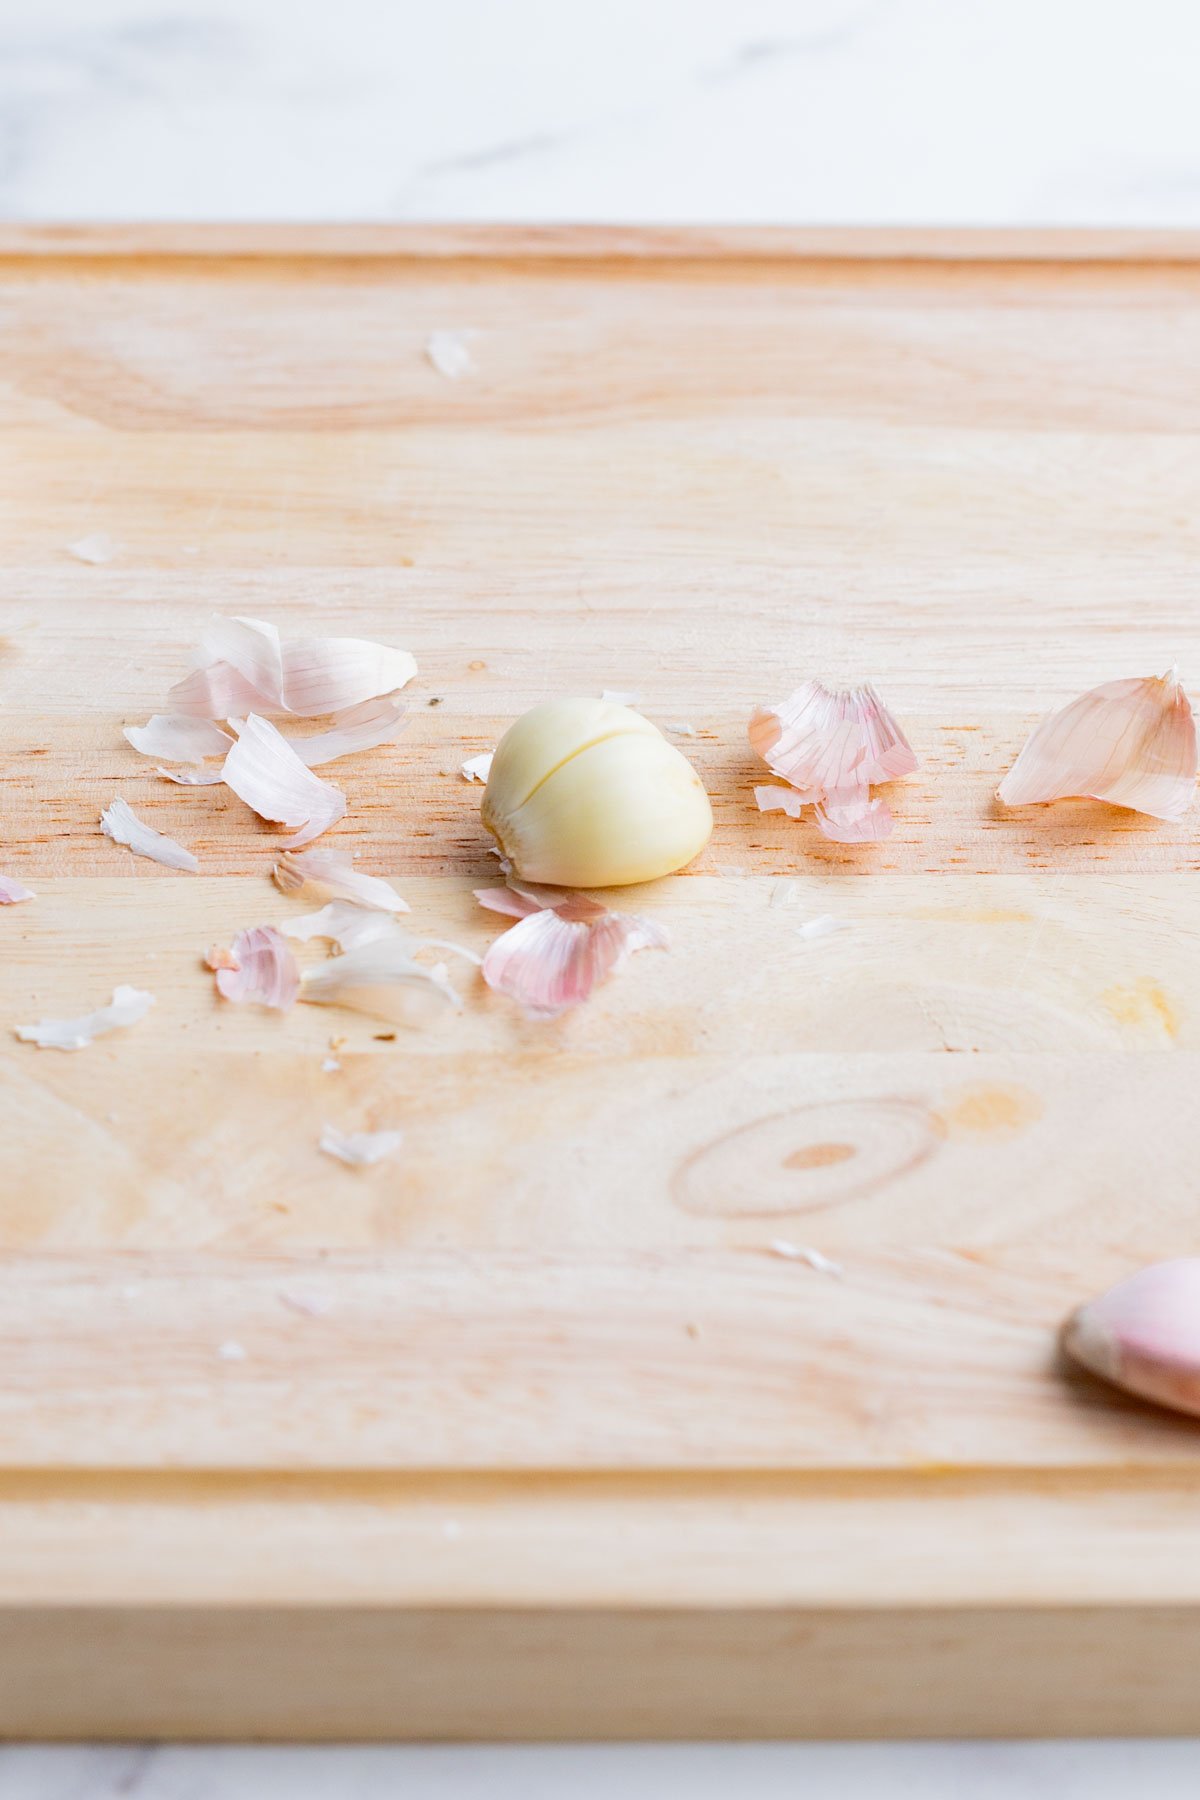 A lone peeled garlic clove surrounded by its outside papery skin on a cutting board.